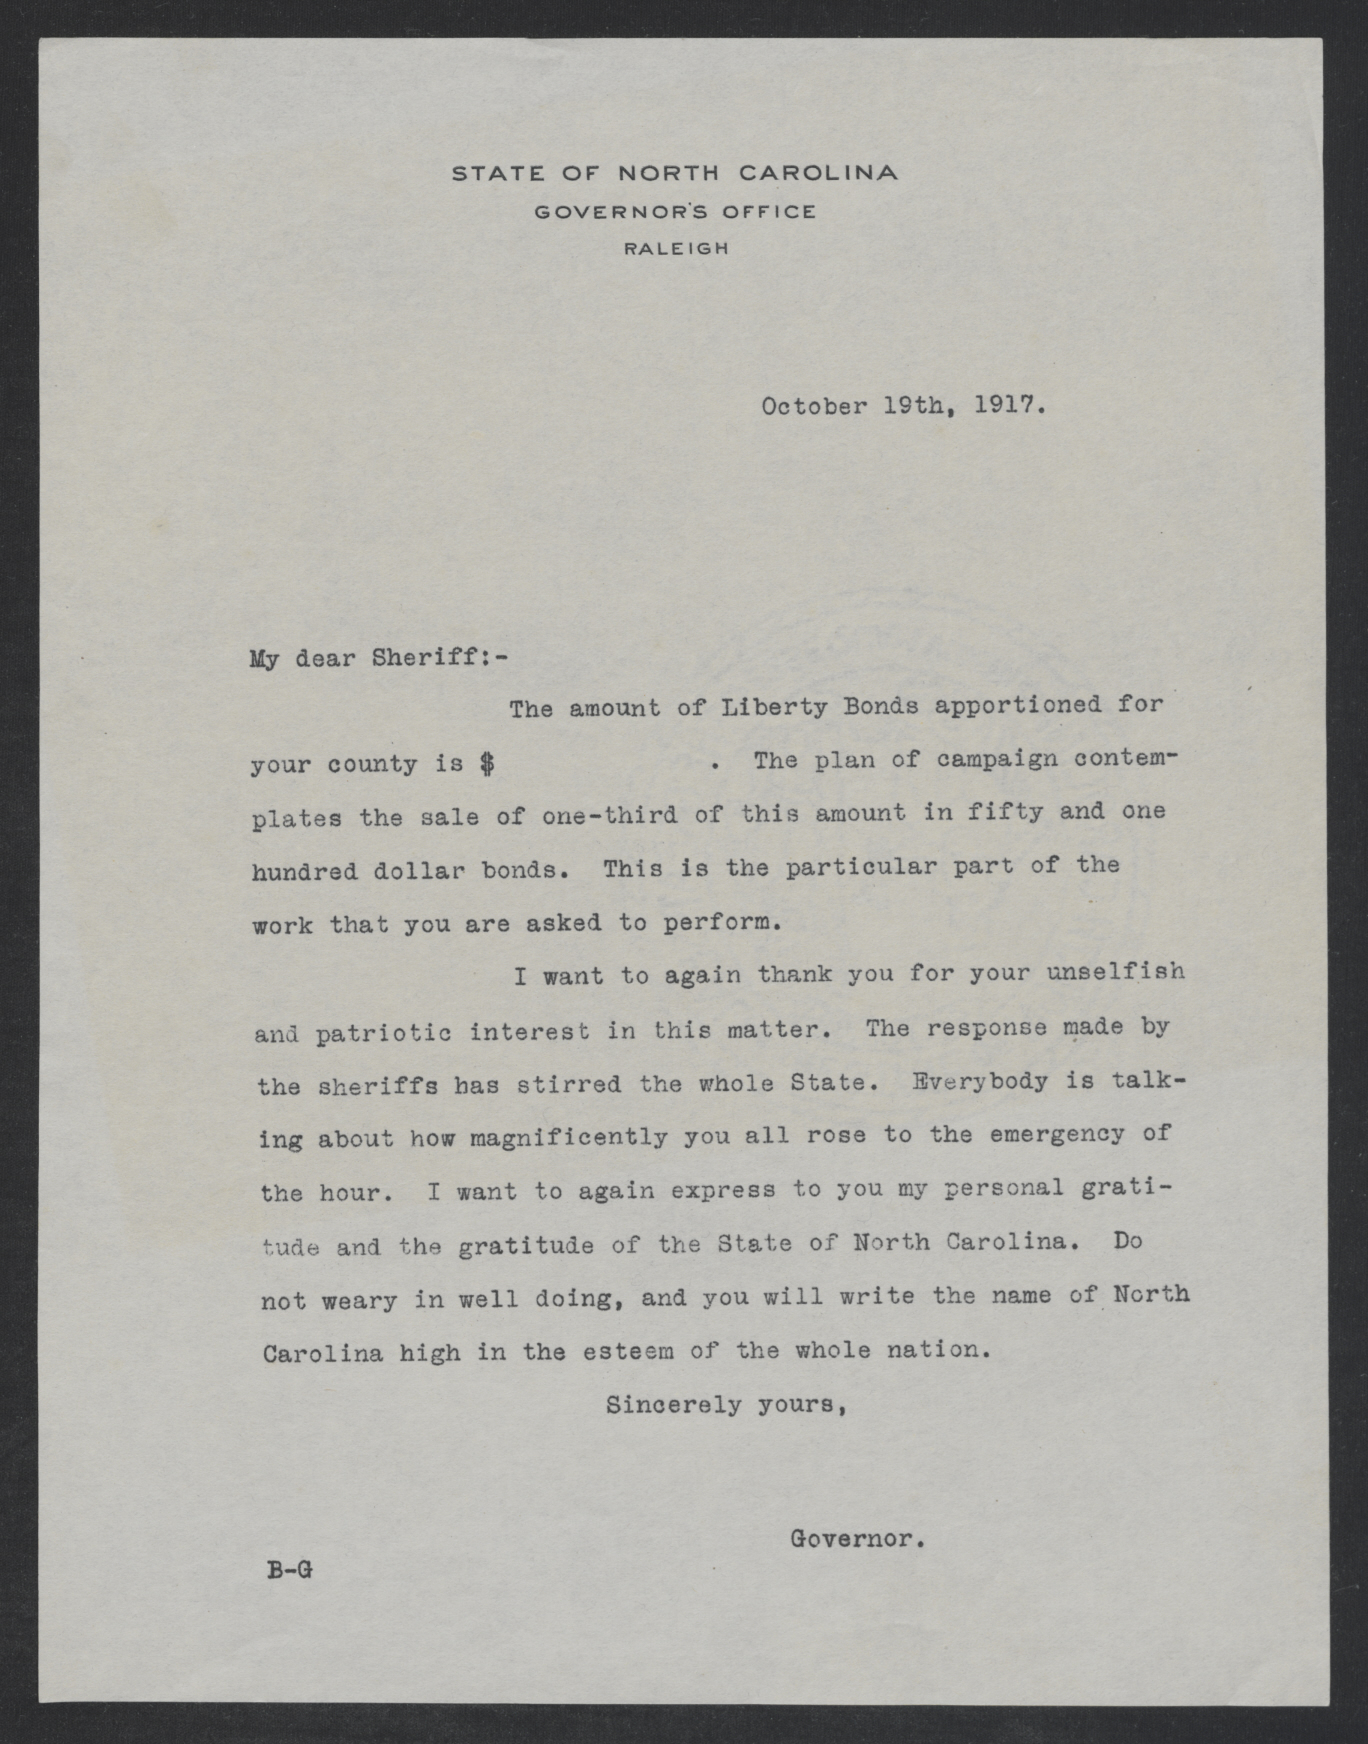 Letter from Thomas W. Bickett to the Sheriffs of North Carolina, October 19, 1917